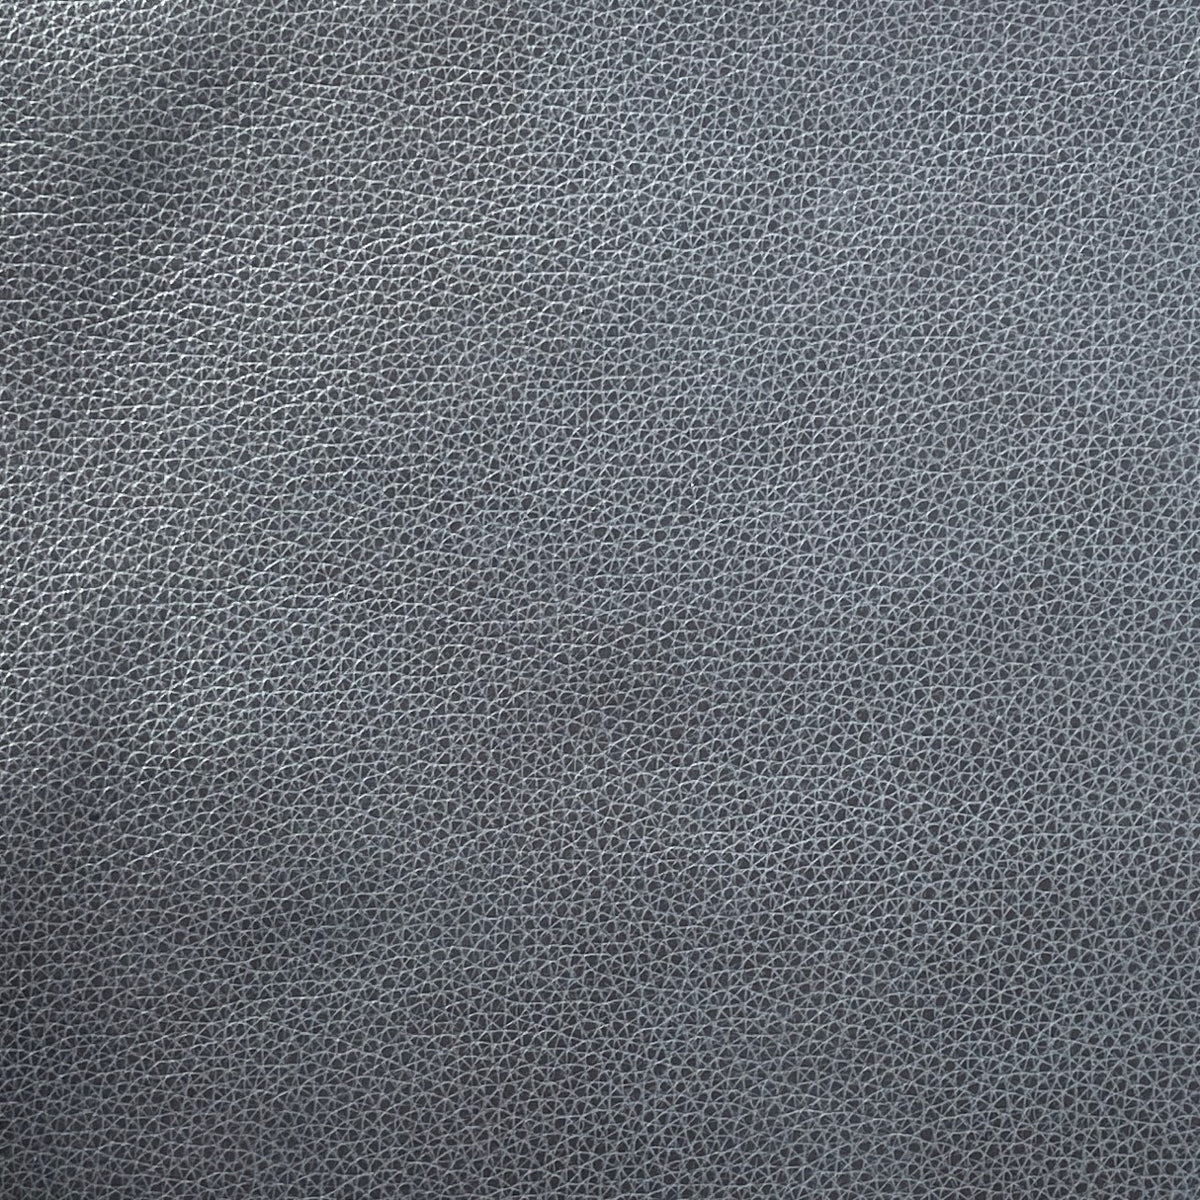 Upholstery Cow Hide #32 | Navy | 1.3 mm | 4.19 sq.m | From $315 ea.